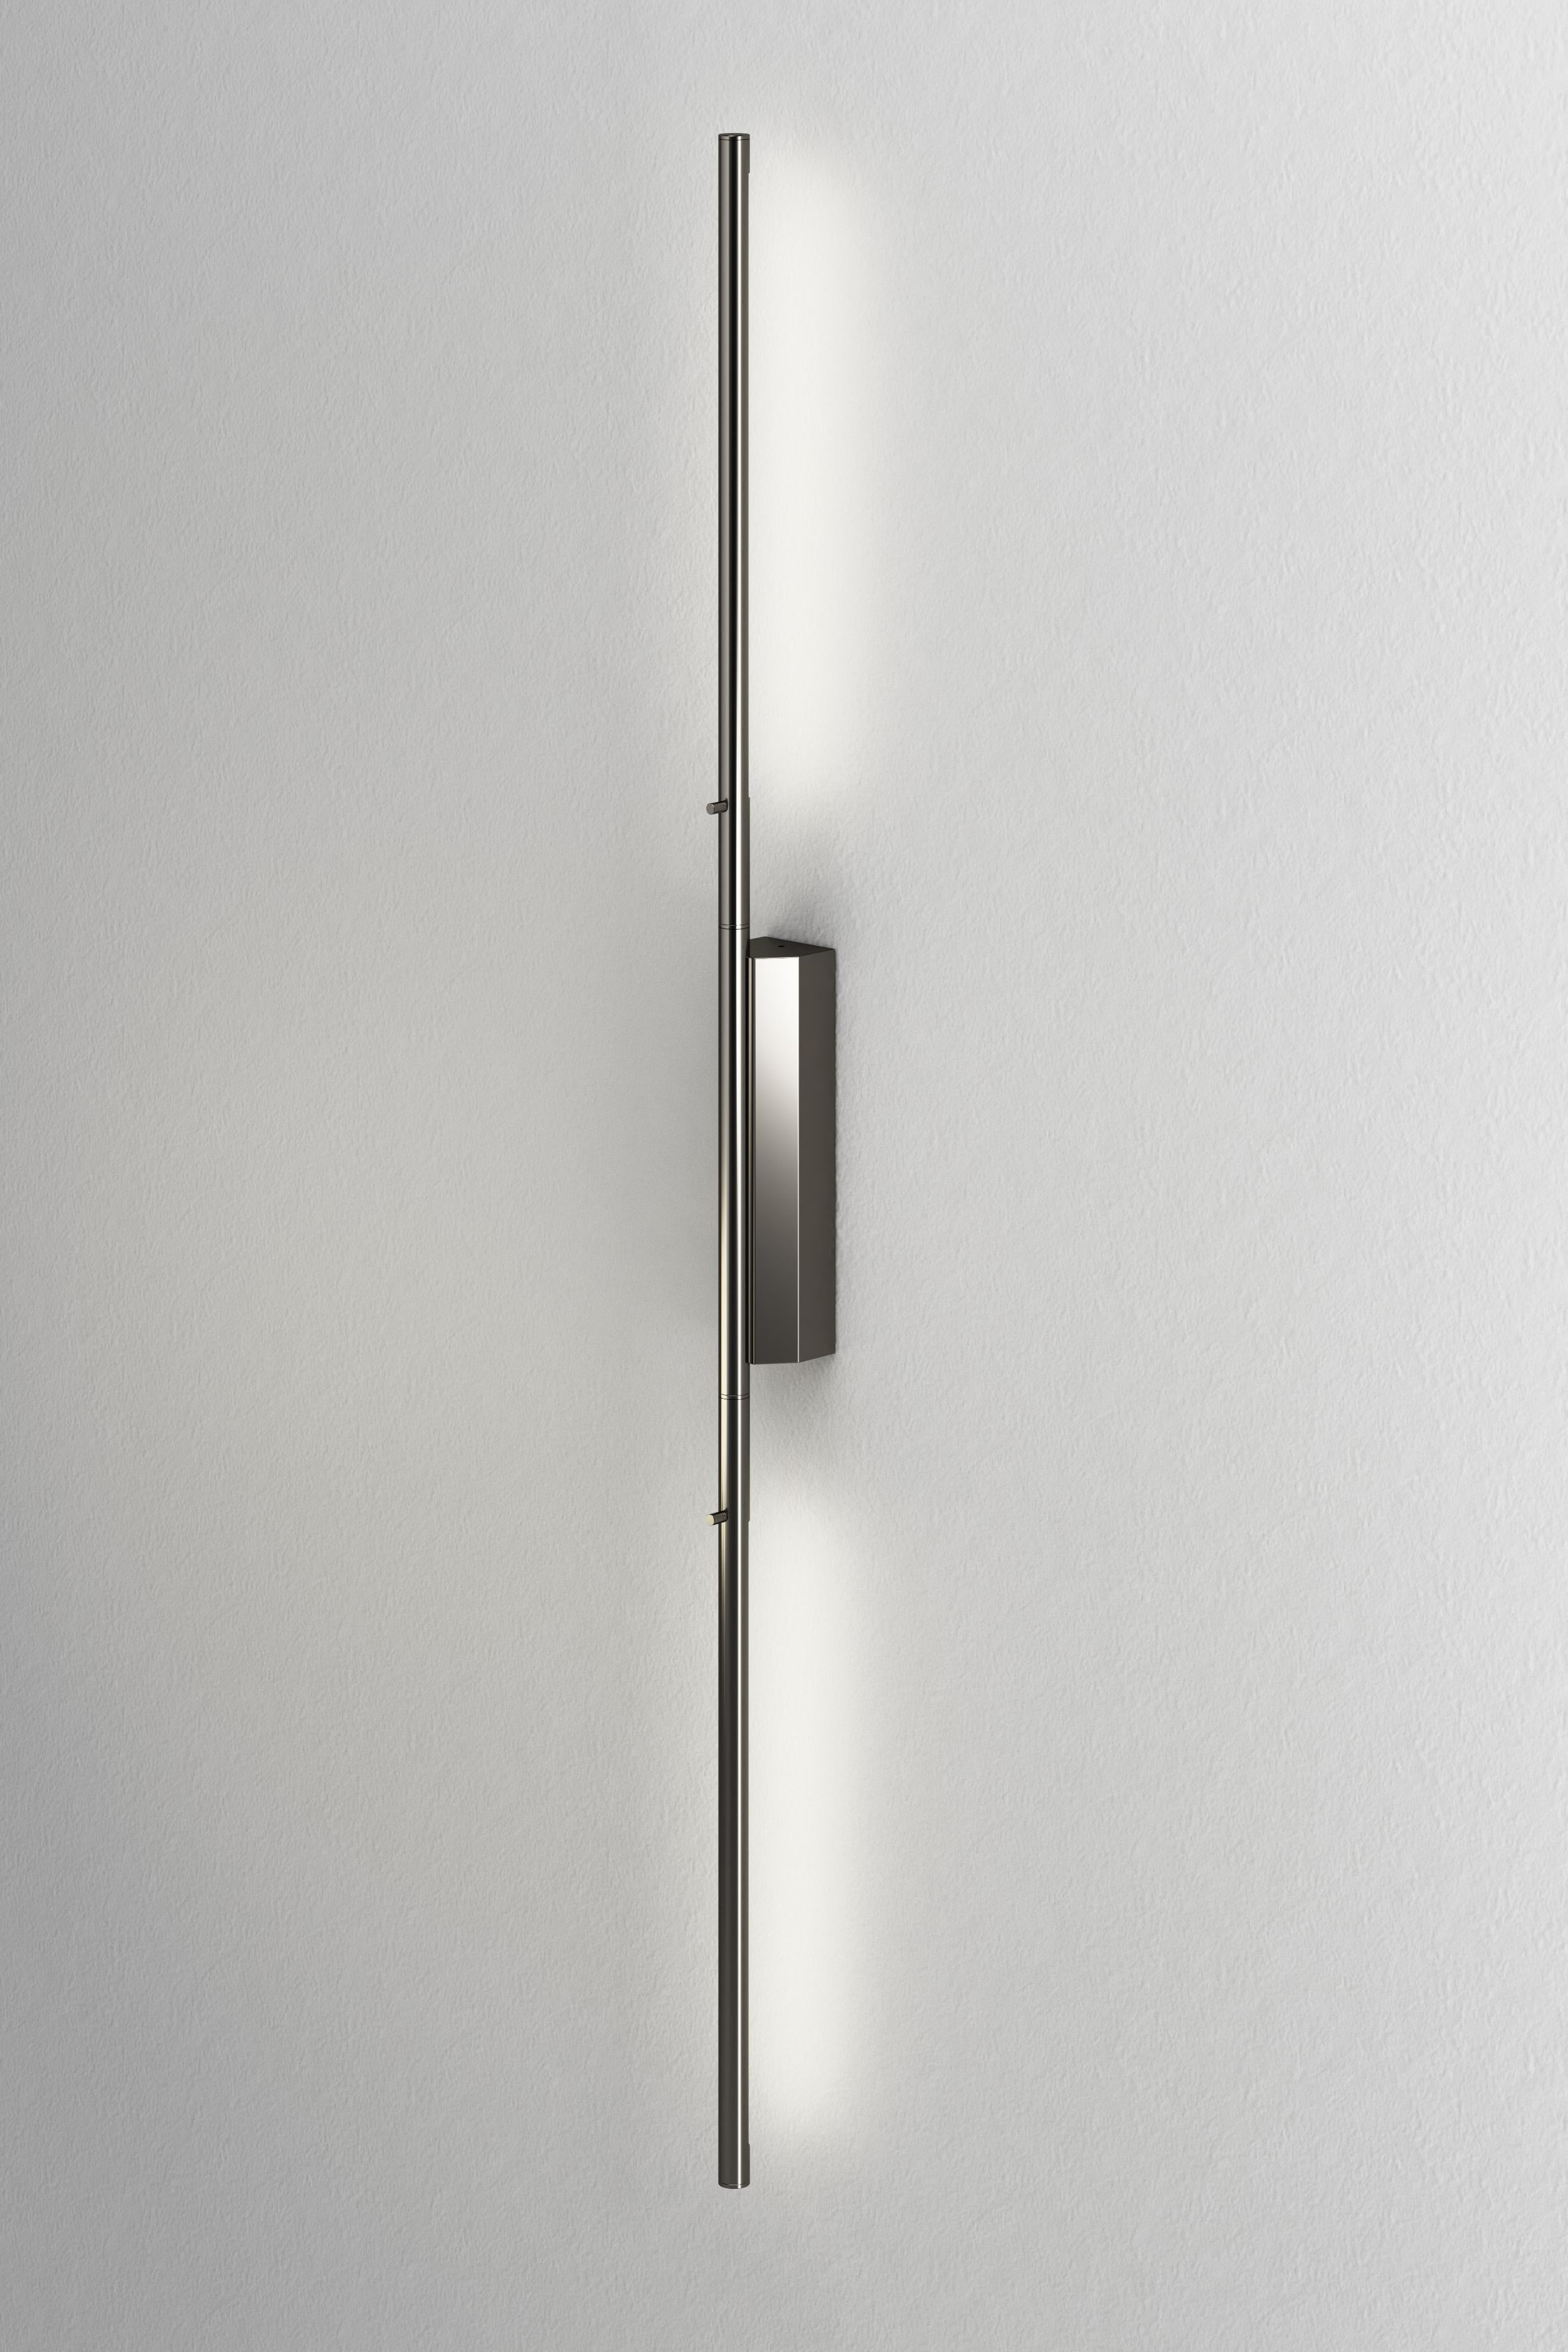 IP Link Double 1300 Satin Graphite wall light by Emilie Cathelineau
Dimensions: D4.5 x W5 X H1300 cm
Materials: Solid brass, Satin Graphite, LED, Polycarbonate.
Others finishes and dimensions are available. 

All our lamps can be wired